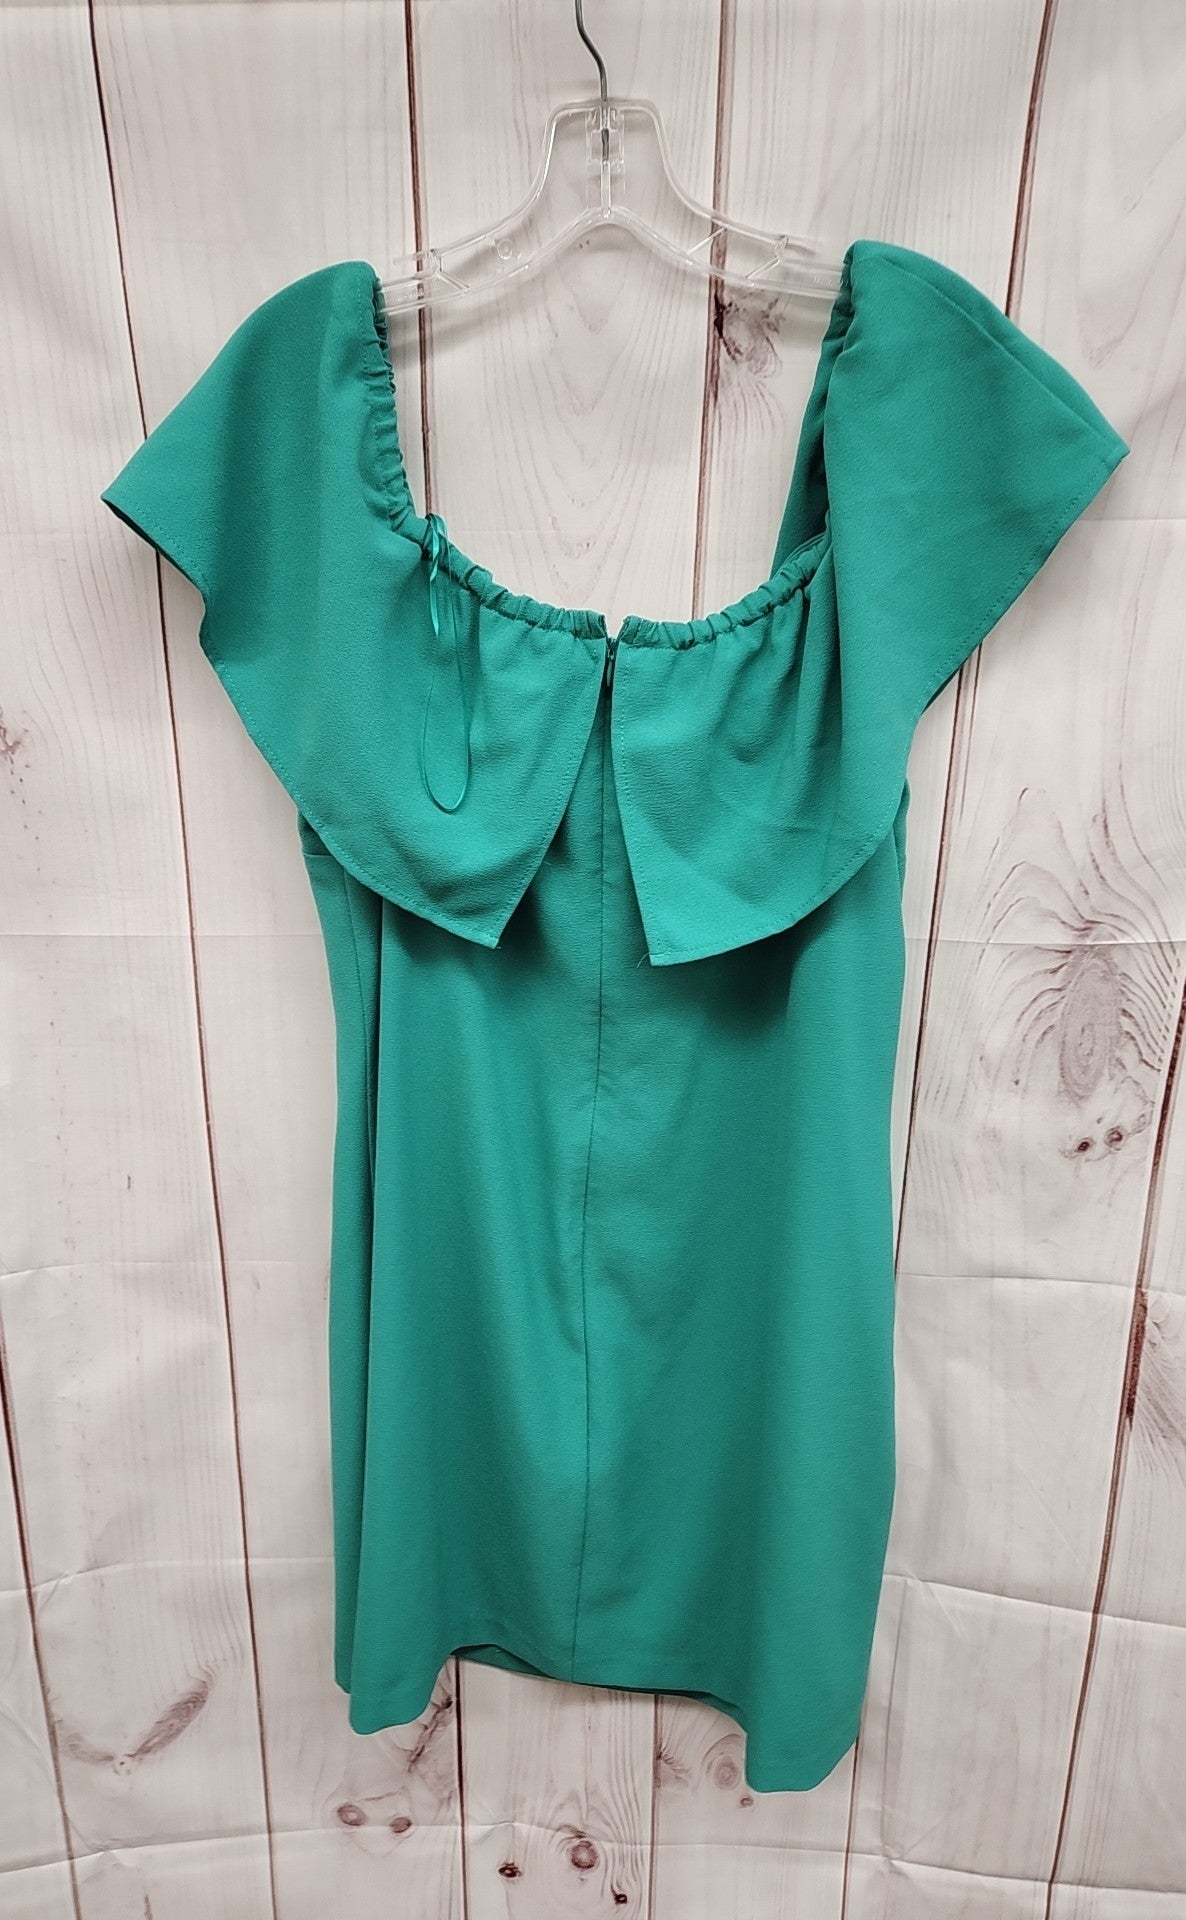 Charles Henry Women's Size XL Turquoise Dress